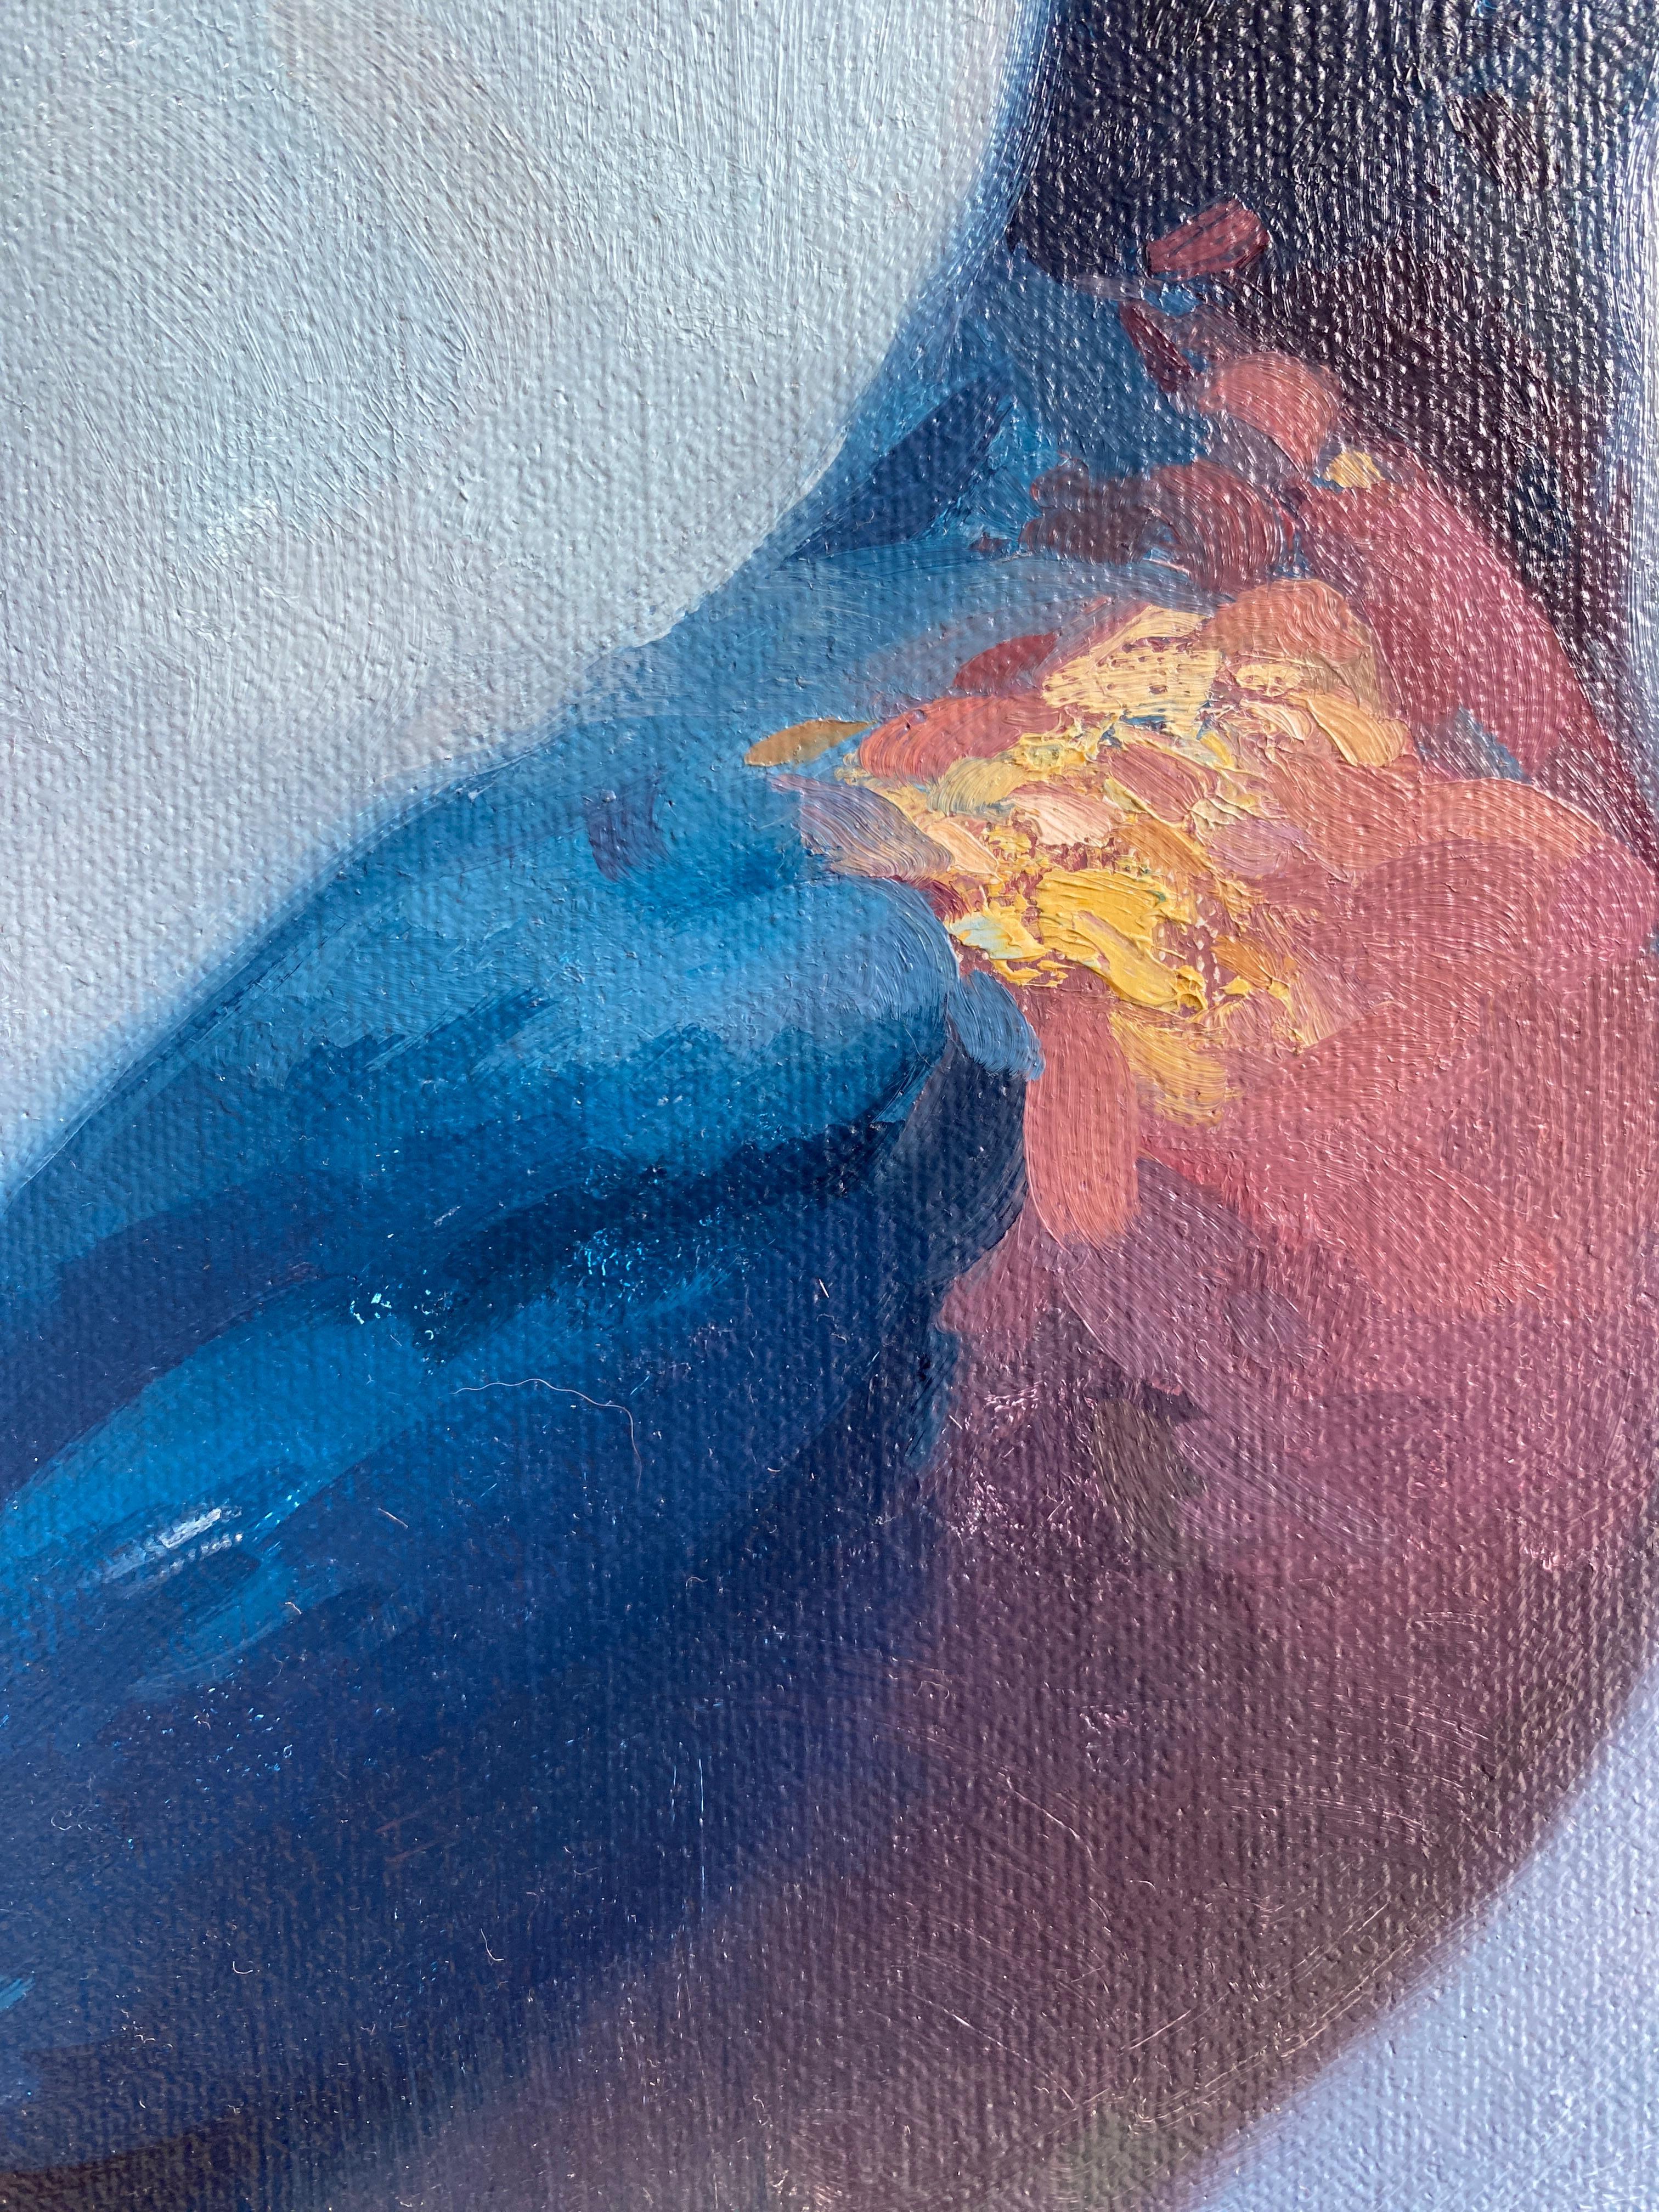 An oil on linen painting of a bird on a branch, seen through Contemporary Realist painter Stephen Bauman's signature cerulean lens. The pigeon appears blue, with a pink belly, and a bright yellow highlight along it's collar. The pointed beach is